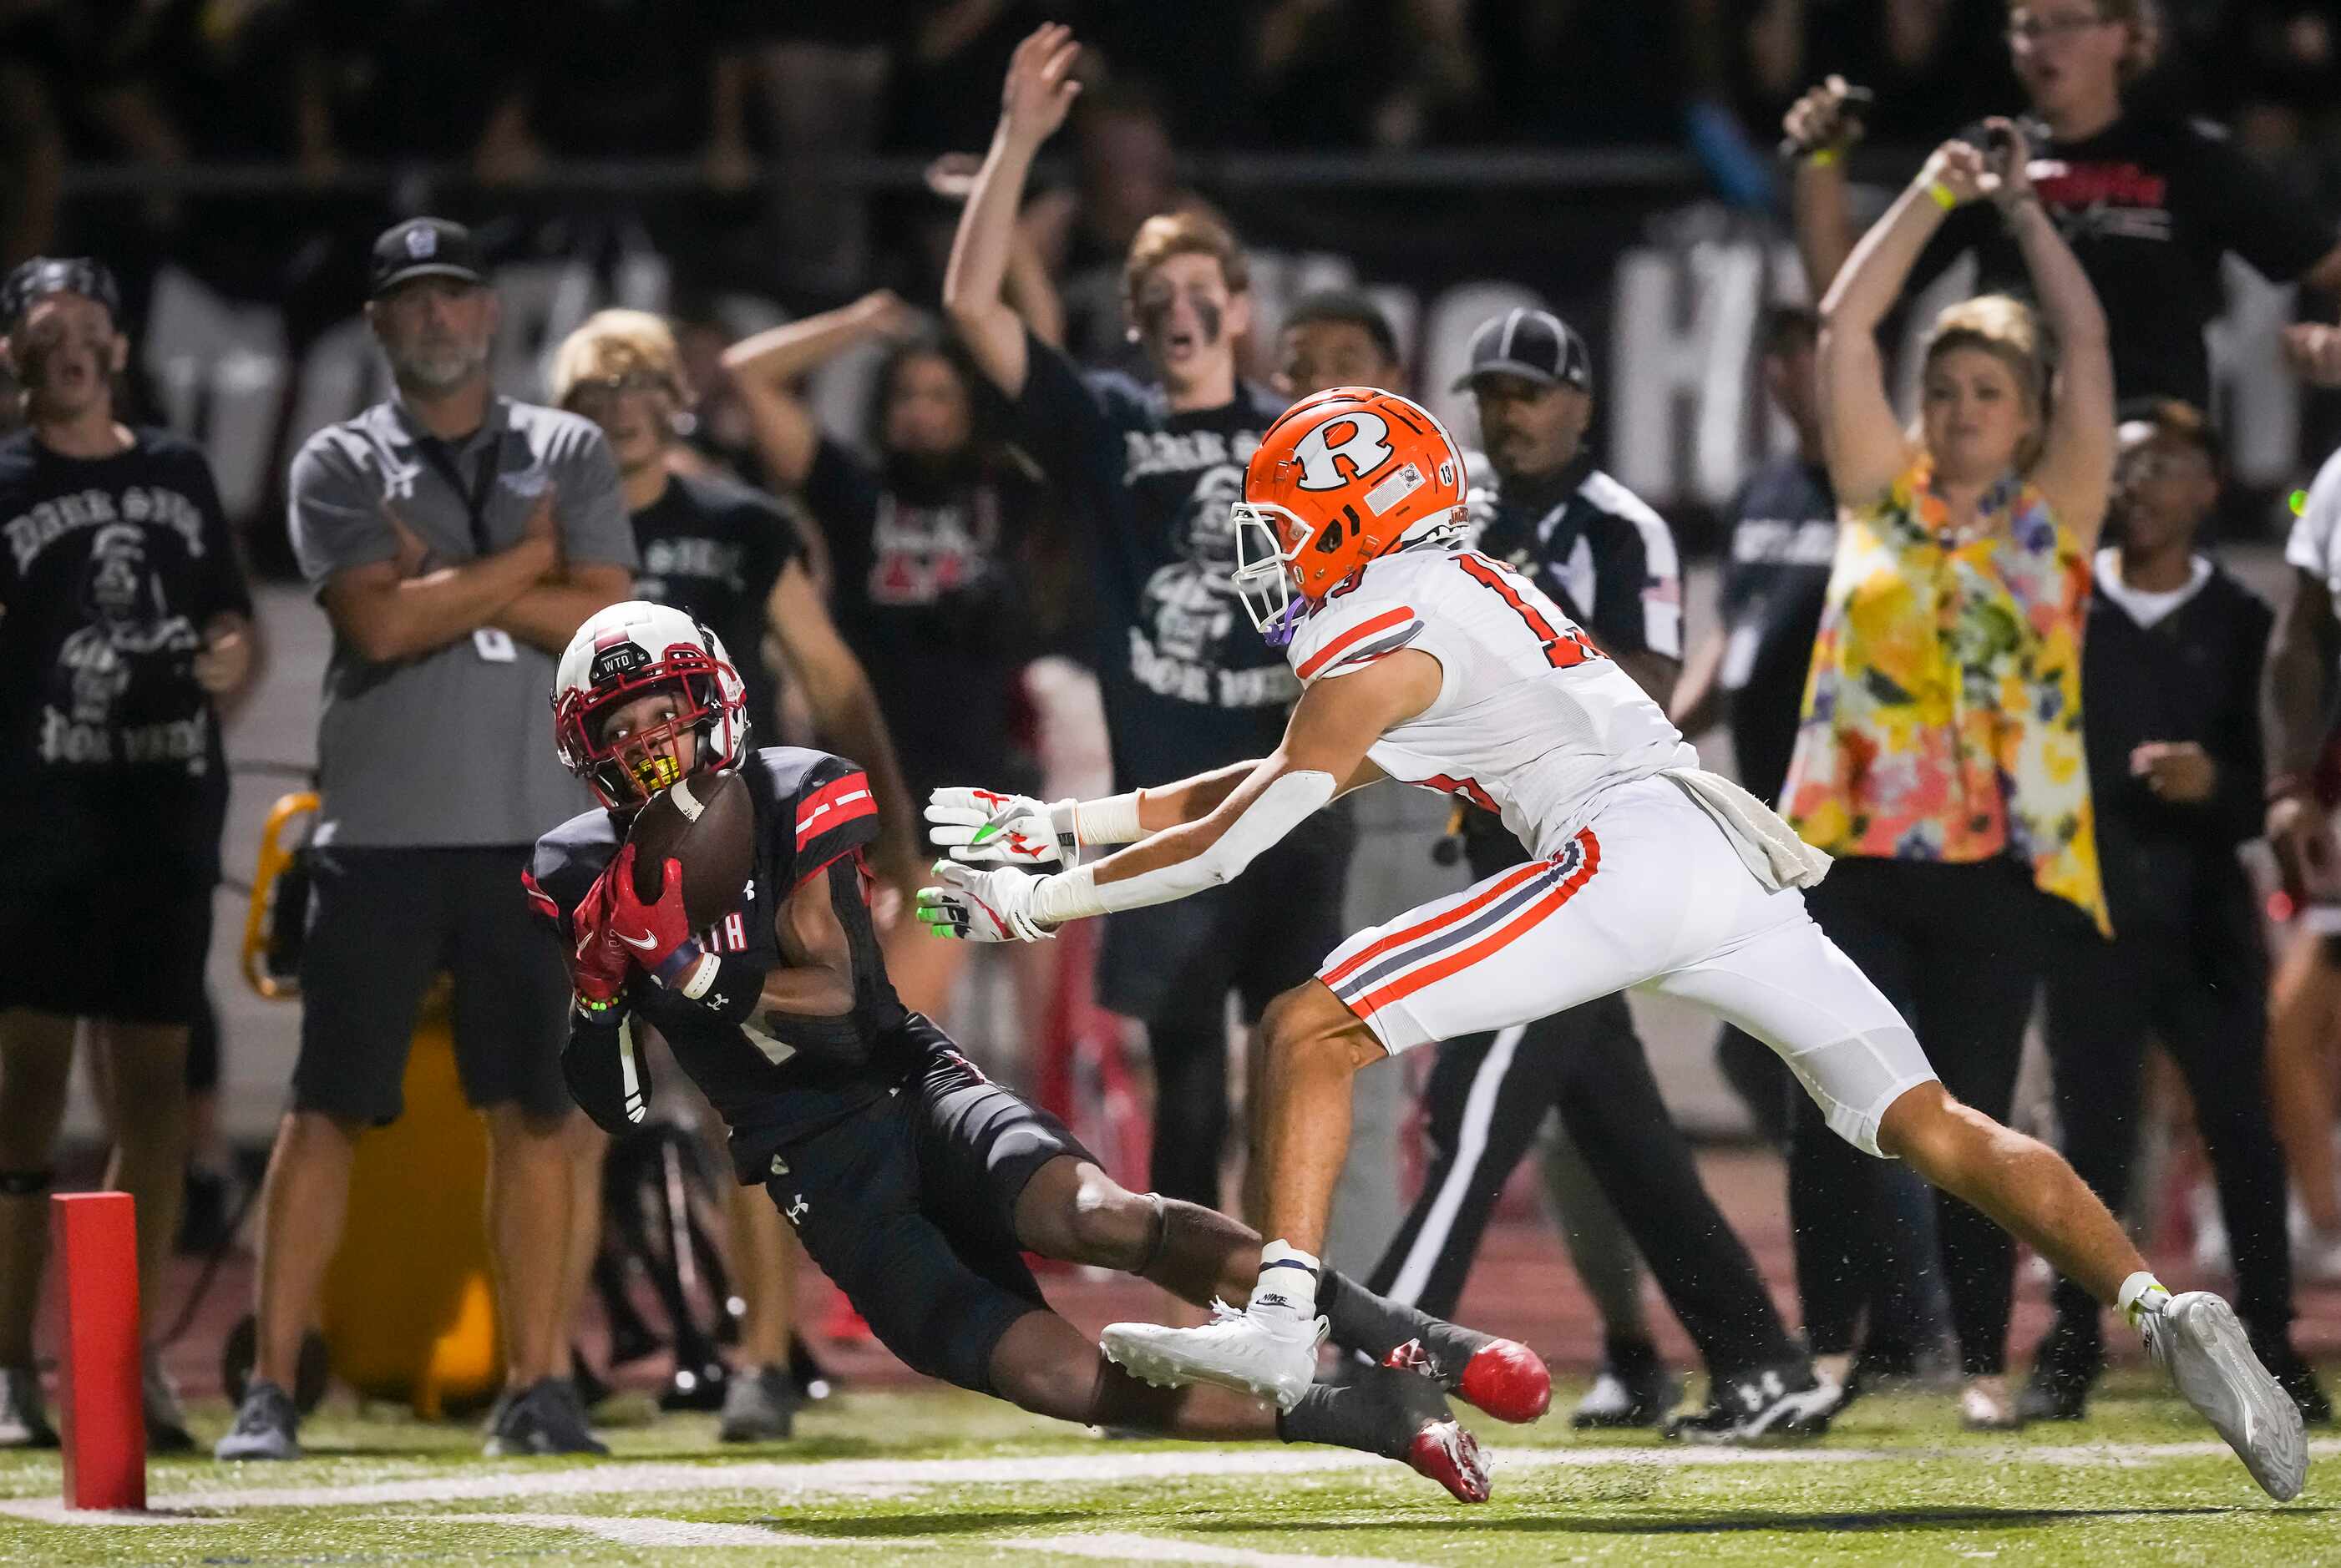 Rockwall-Heath wide receiver Jay Fair (1) can’t make a diving catch at the goal line as...